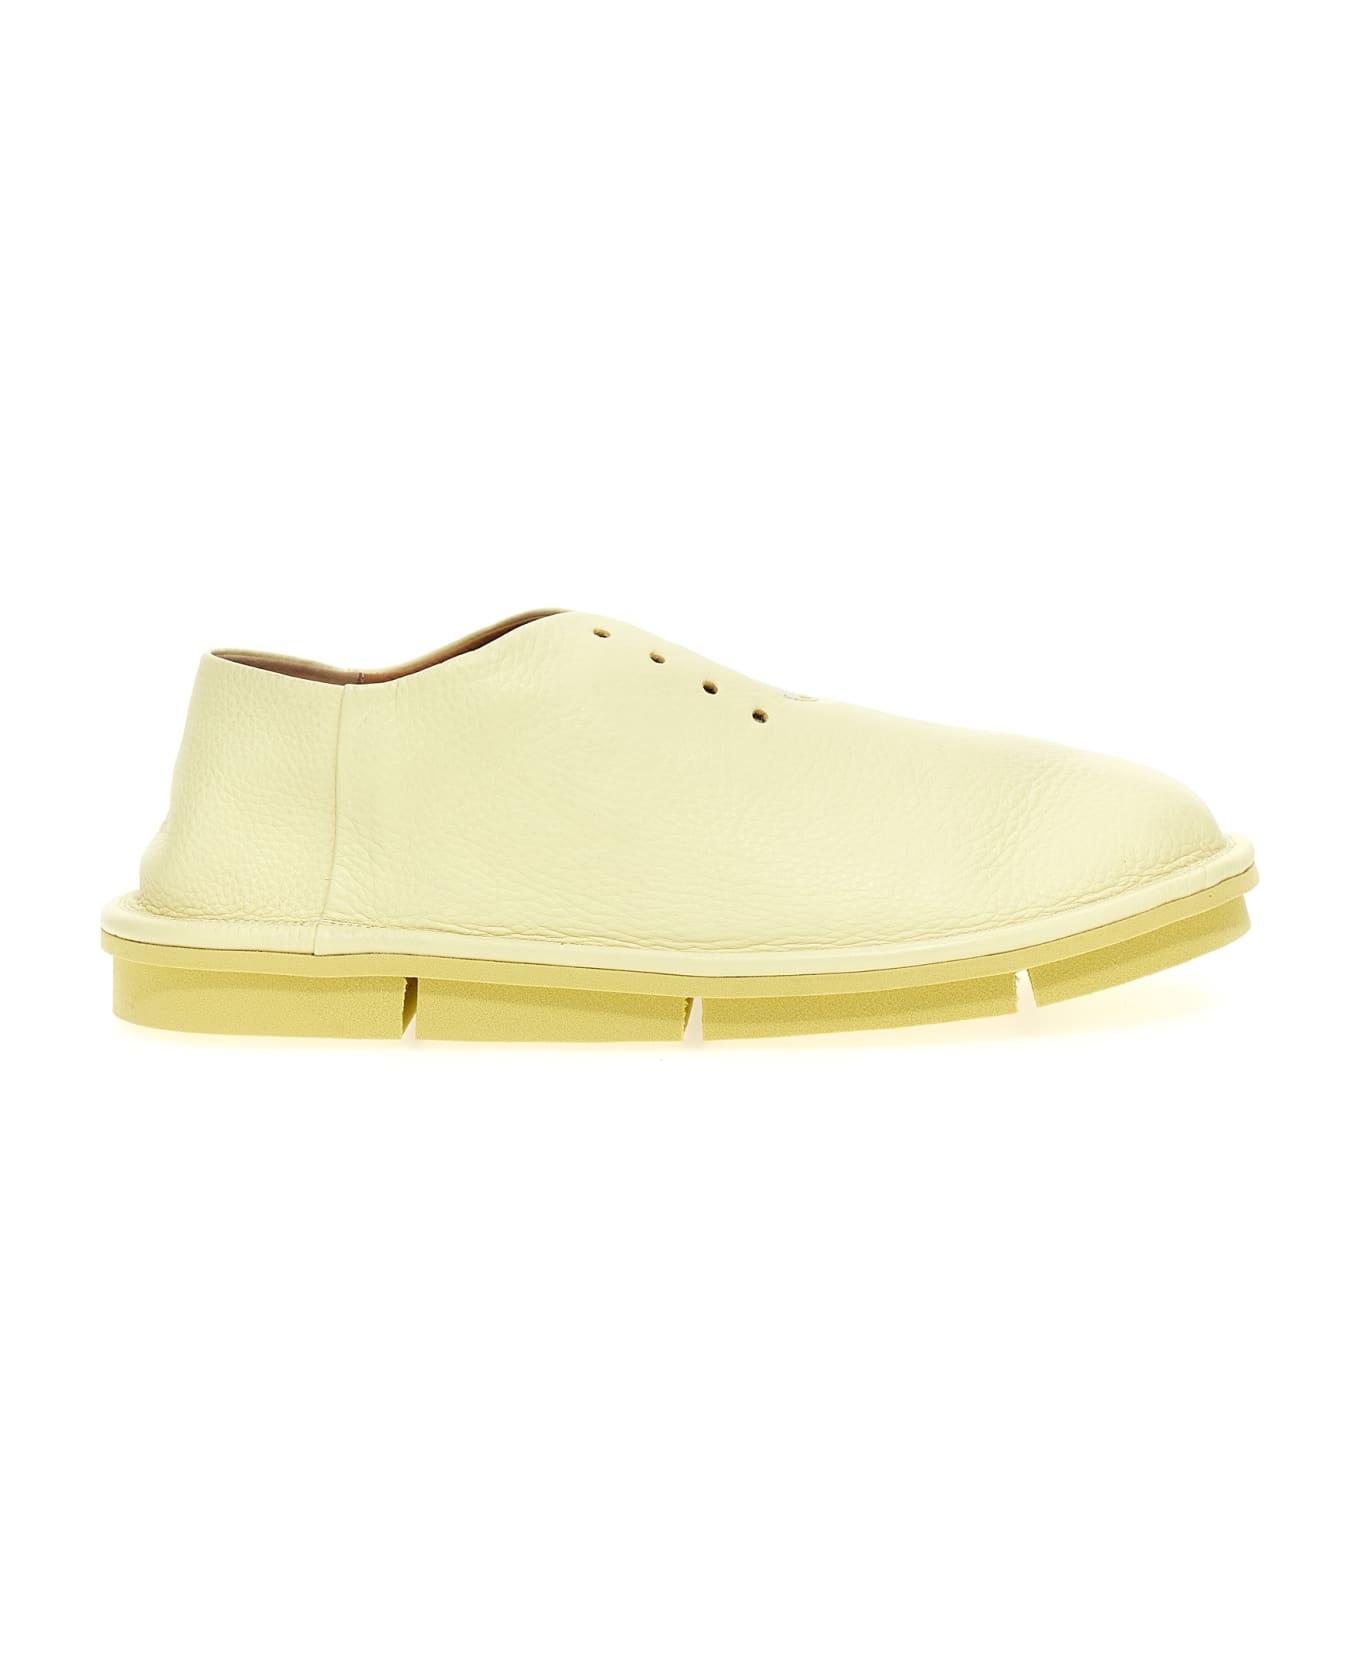 Marsell 'isoletta' Derby Shoes - Yellow ローファー＆デッキシューズ